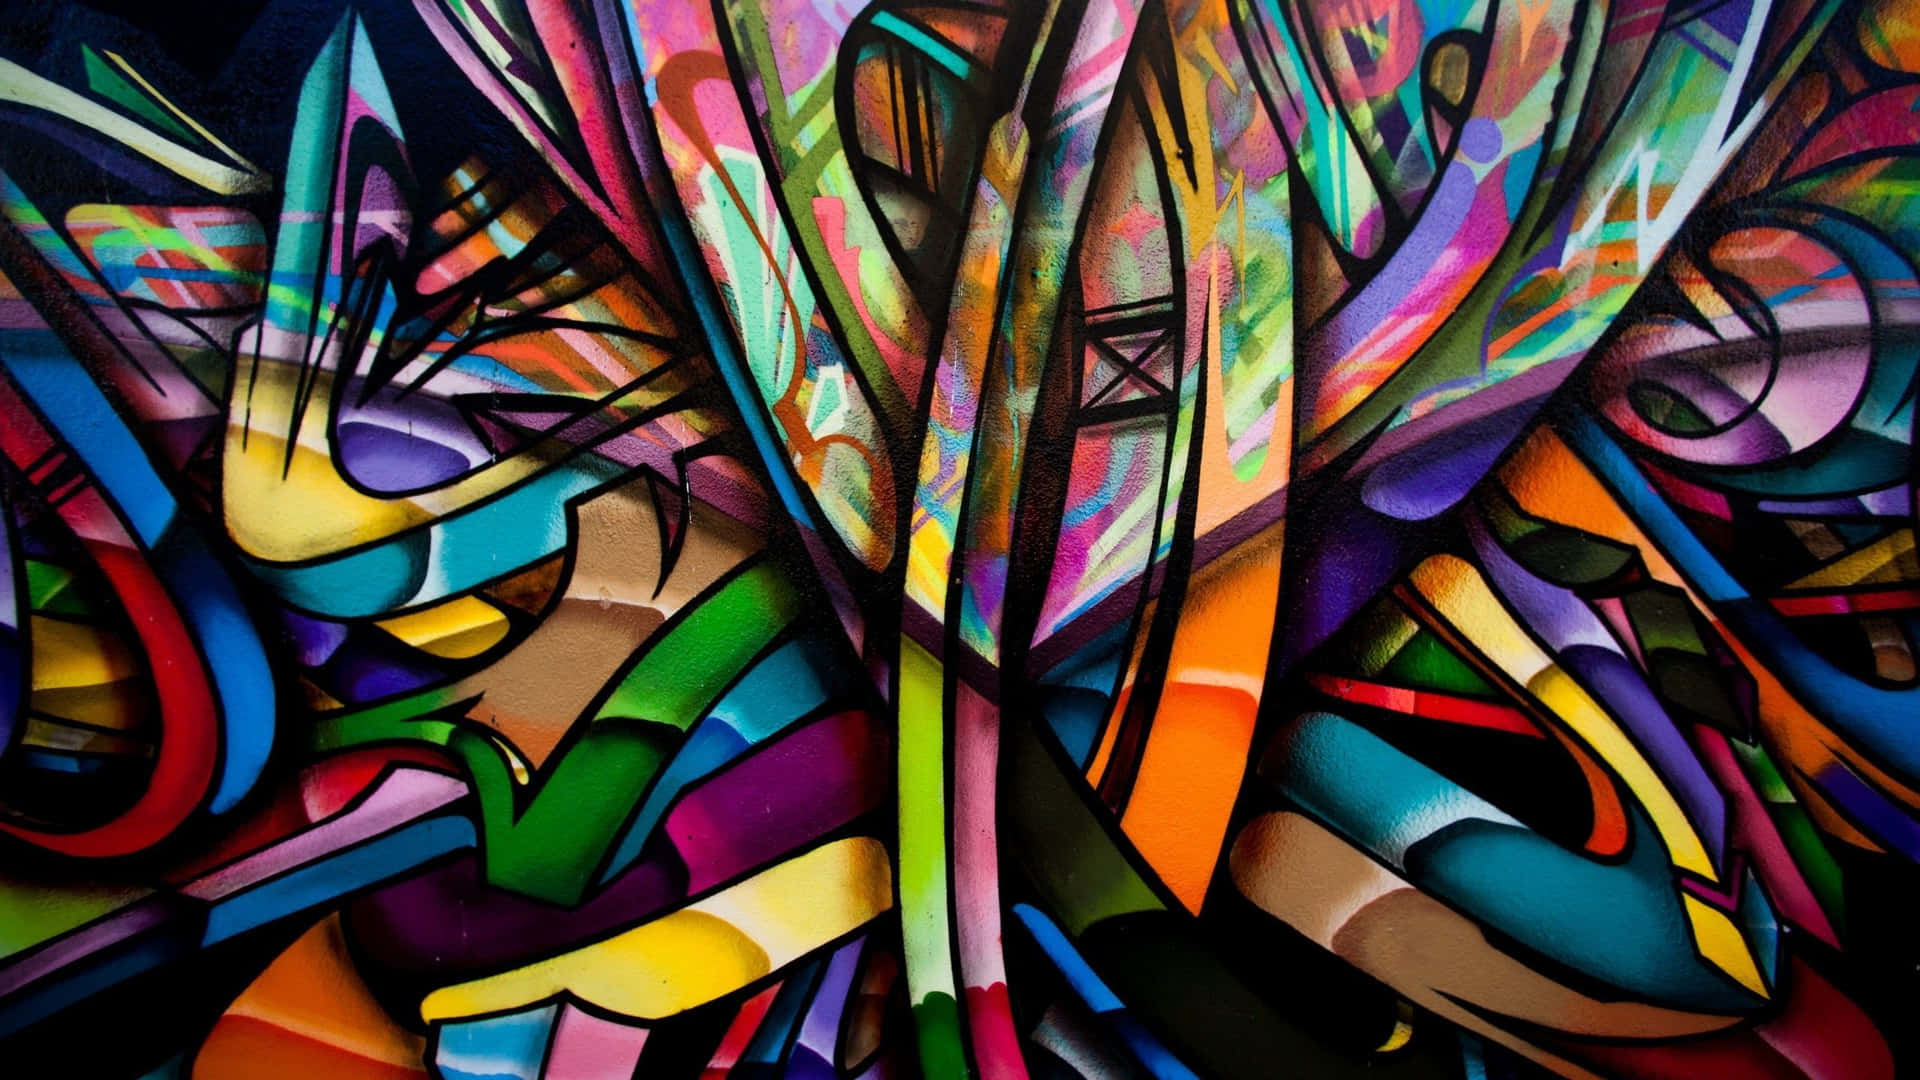 Colorful Abstract Art In Graffiti Style